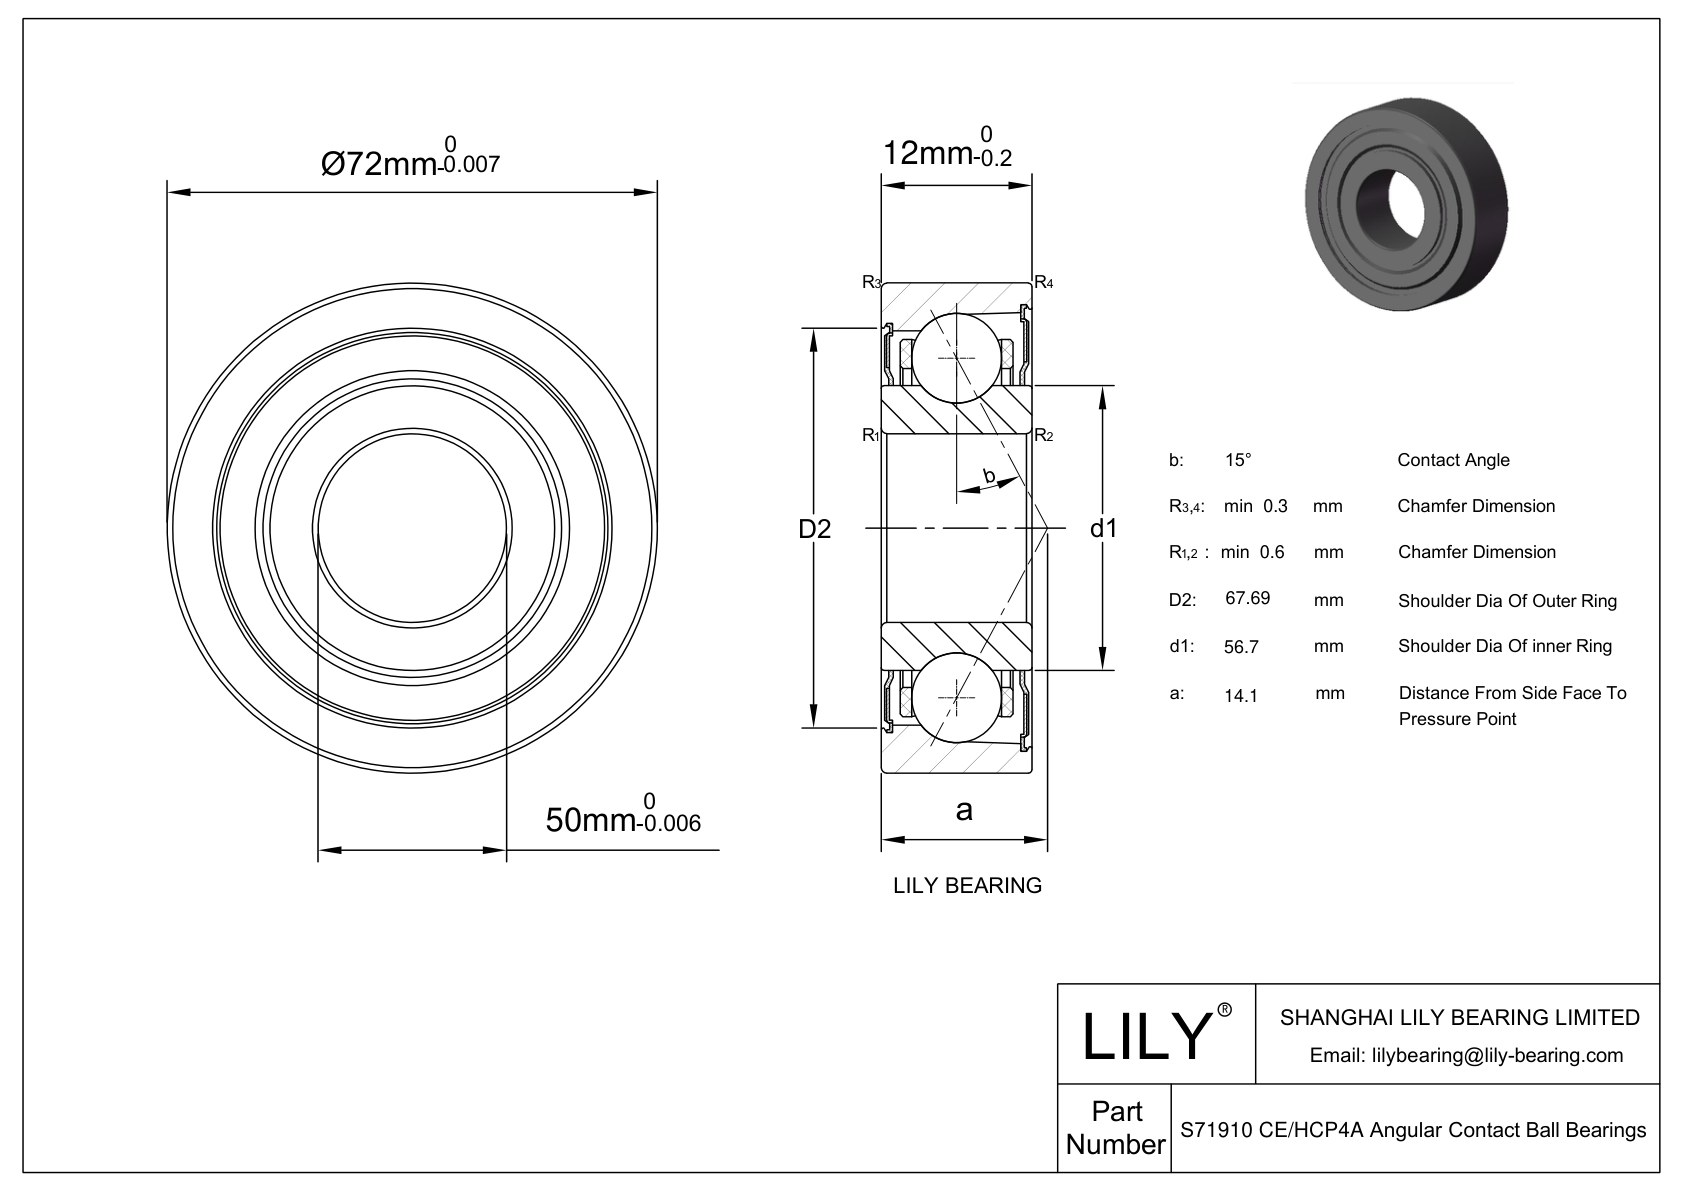 S71910 CE/HCP4A Super Precision Angular Contact Ball Bearings cad drawing